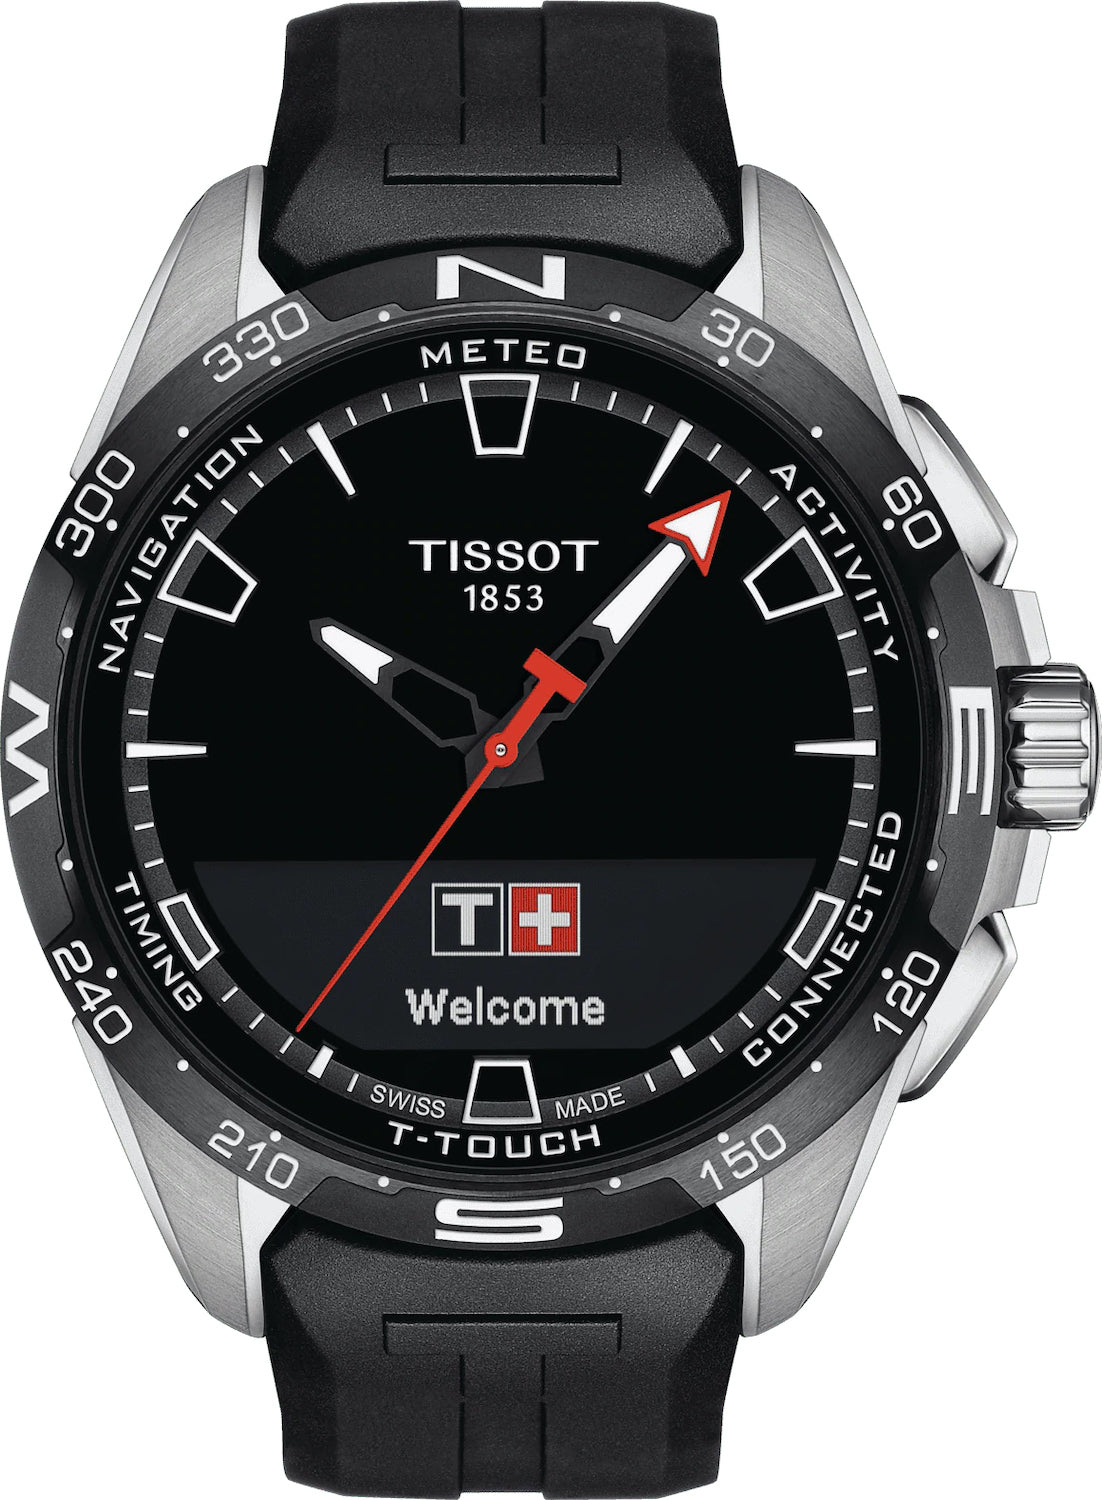 Tissot Watch T-touch Connect Solar Mens